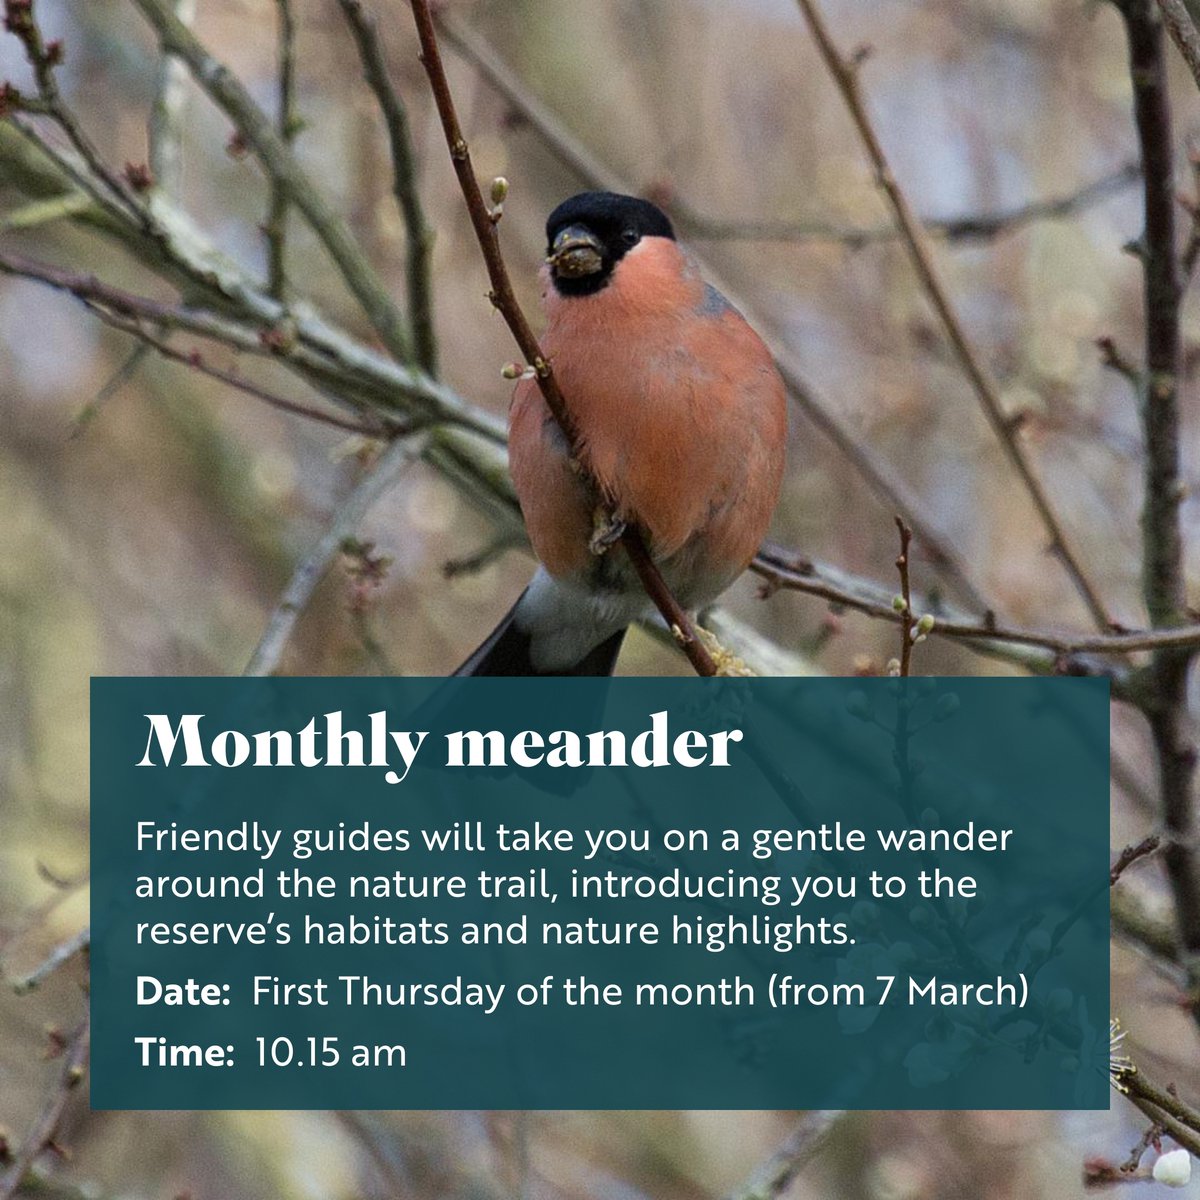 Great news - our Thursday morning walks are back! We'll be running our 'monthly meander' on the first Thursday of the month, starting next Thursday (7 March) when our friendly team of guides will showcase our seasonal wildlife highlights. Find out more: events.rspb.org.uk/pulboroughbroo…